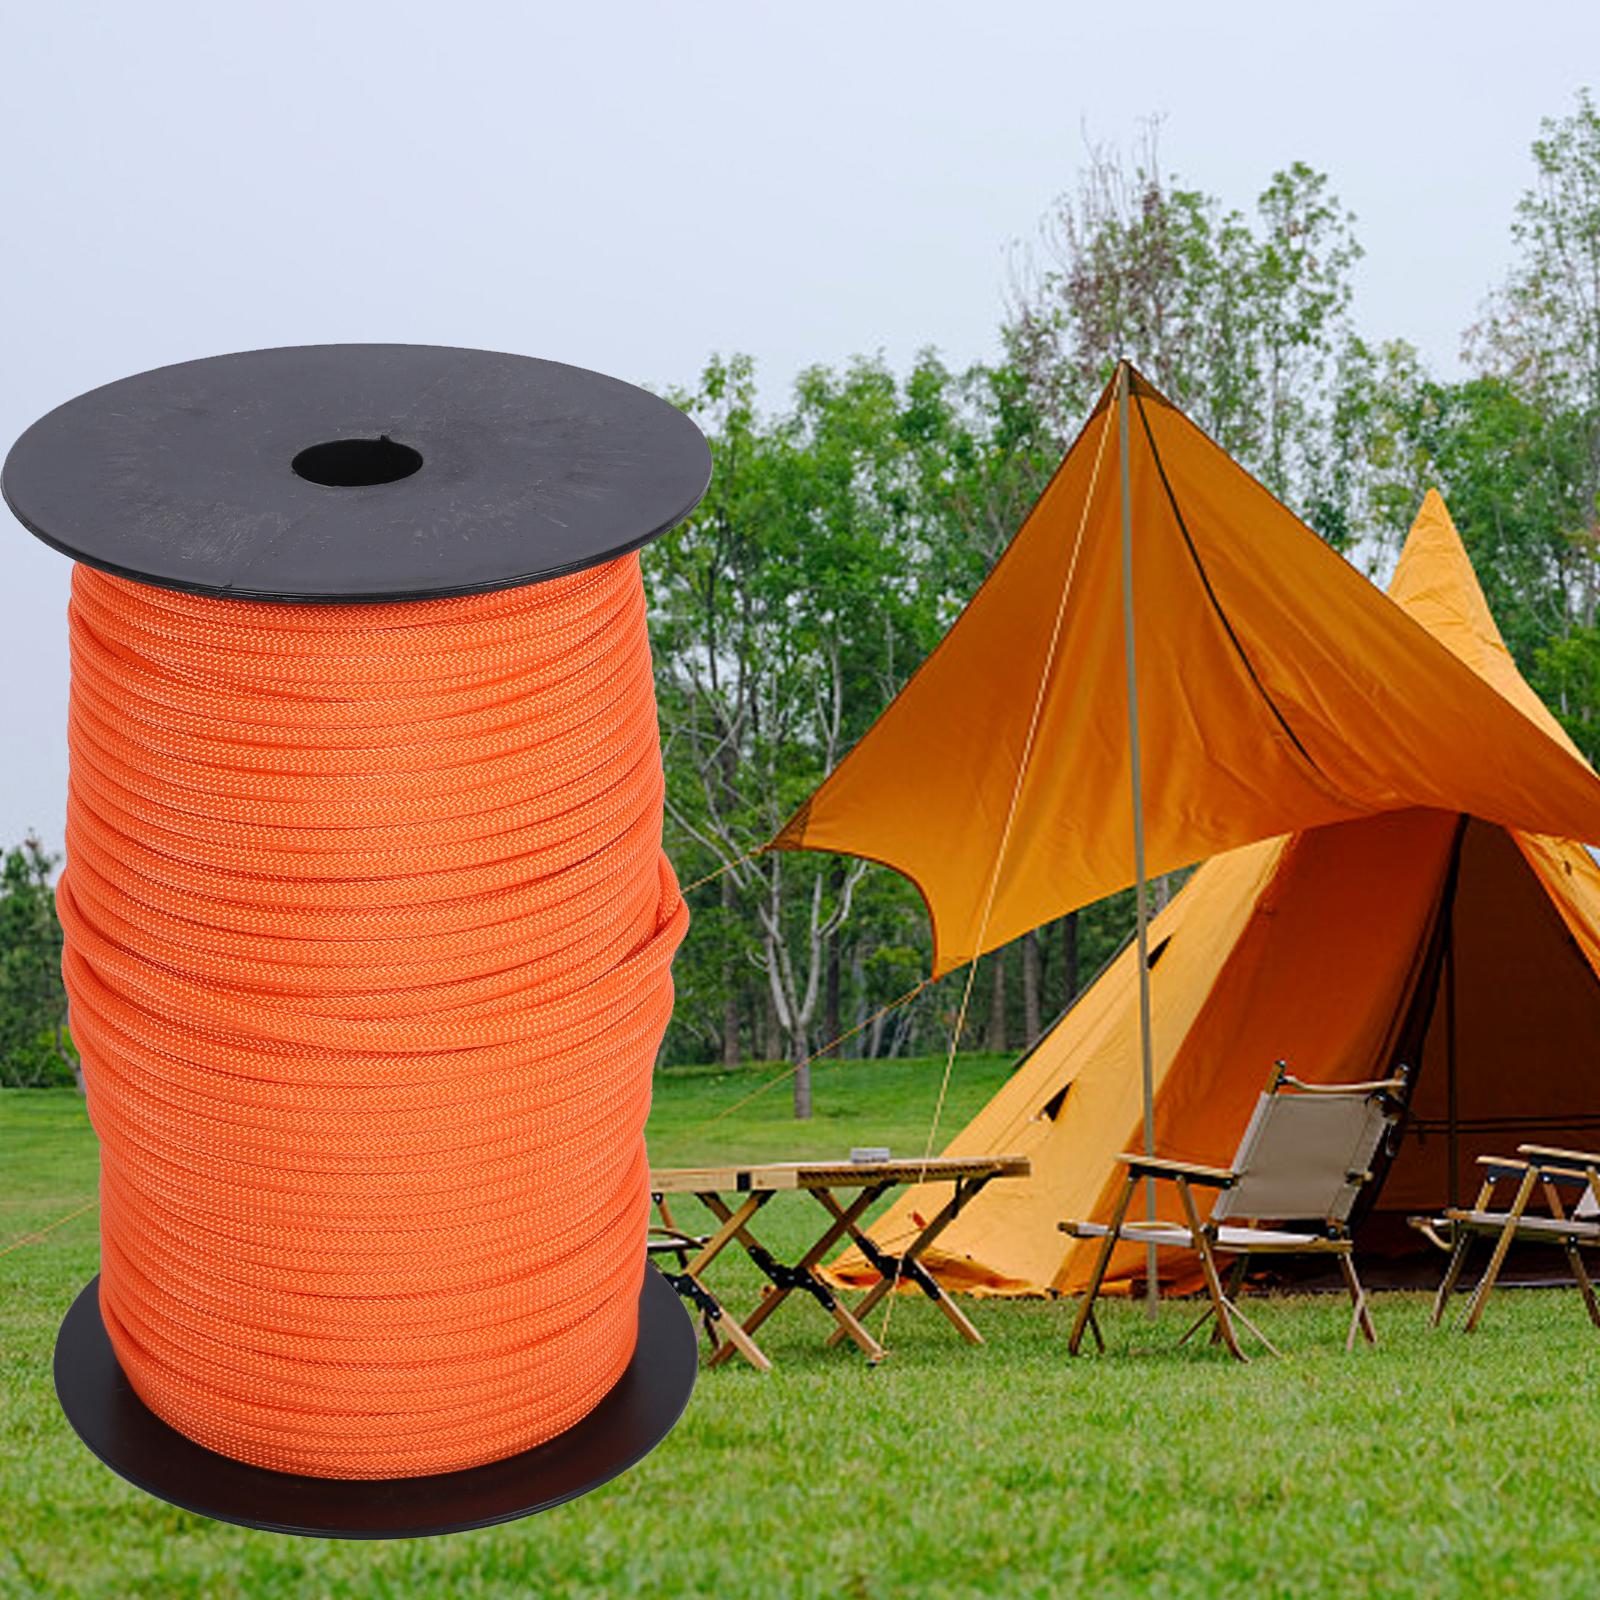 4mm Paracord Camping Rope Survival tent Accessory Camping Orange 